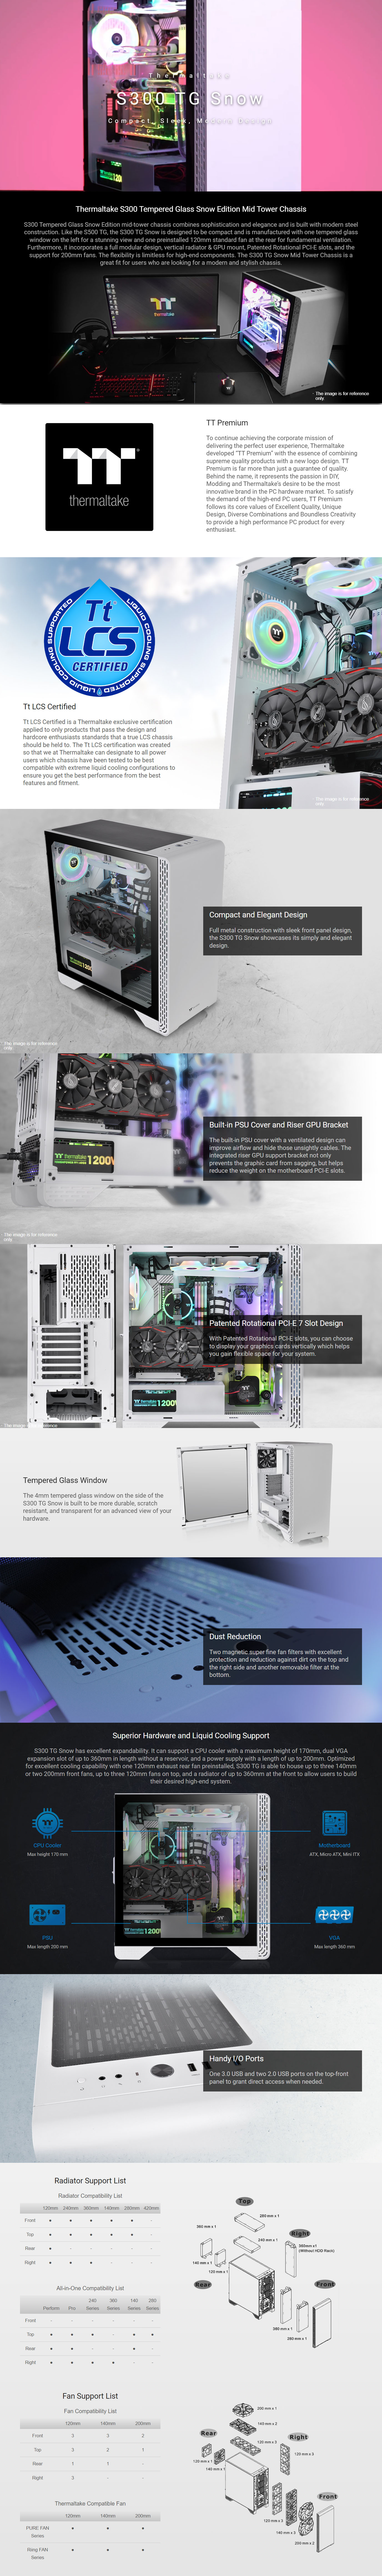 Thermaltake-Cases-Thermaltake-S300-Tempered-Glass-Mid-Tower-Case-Snow-Edition-1